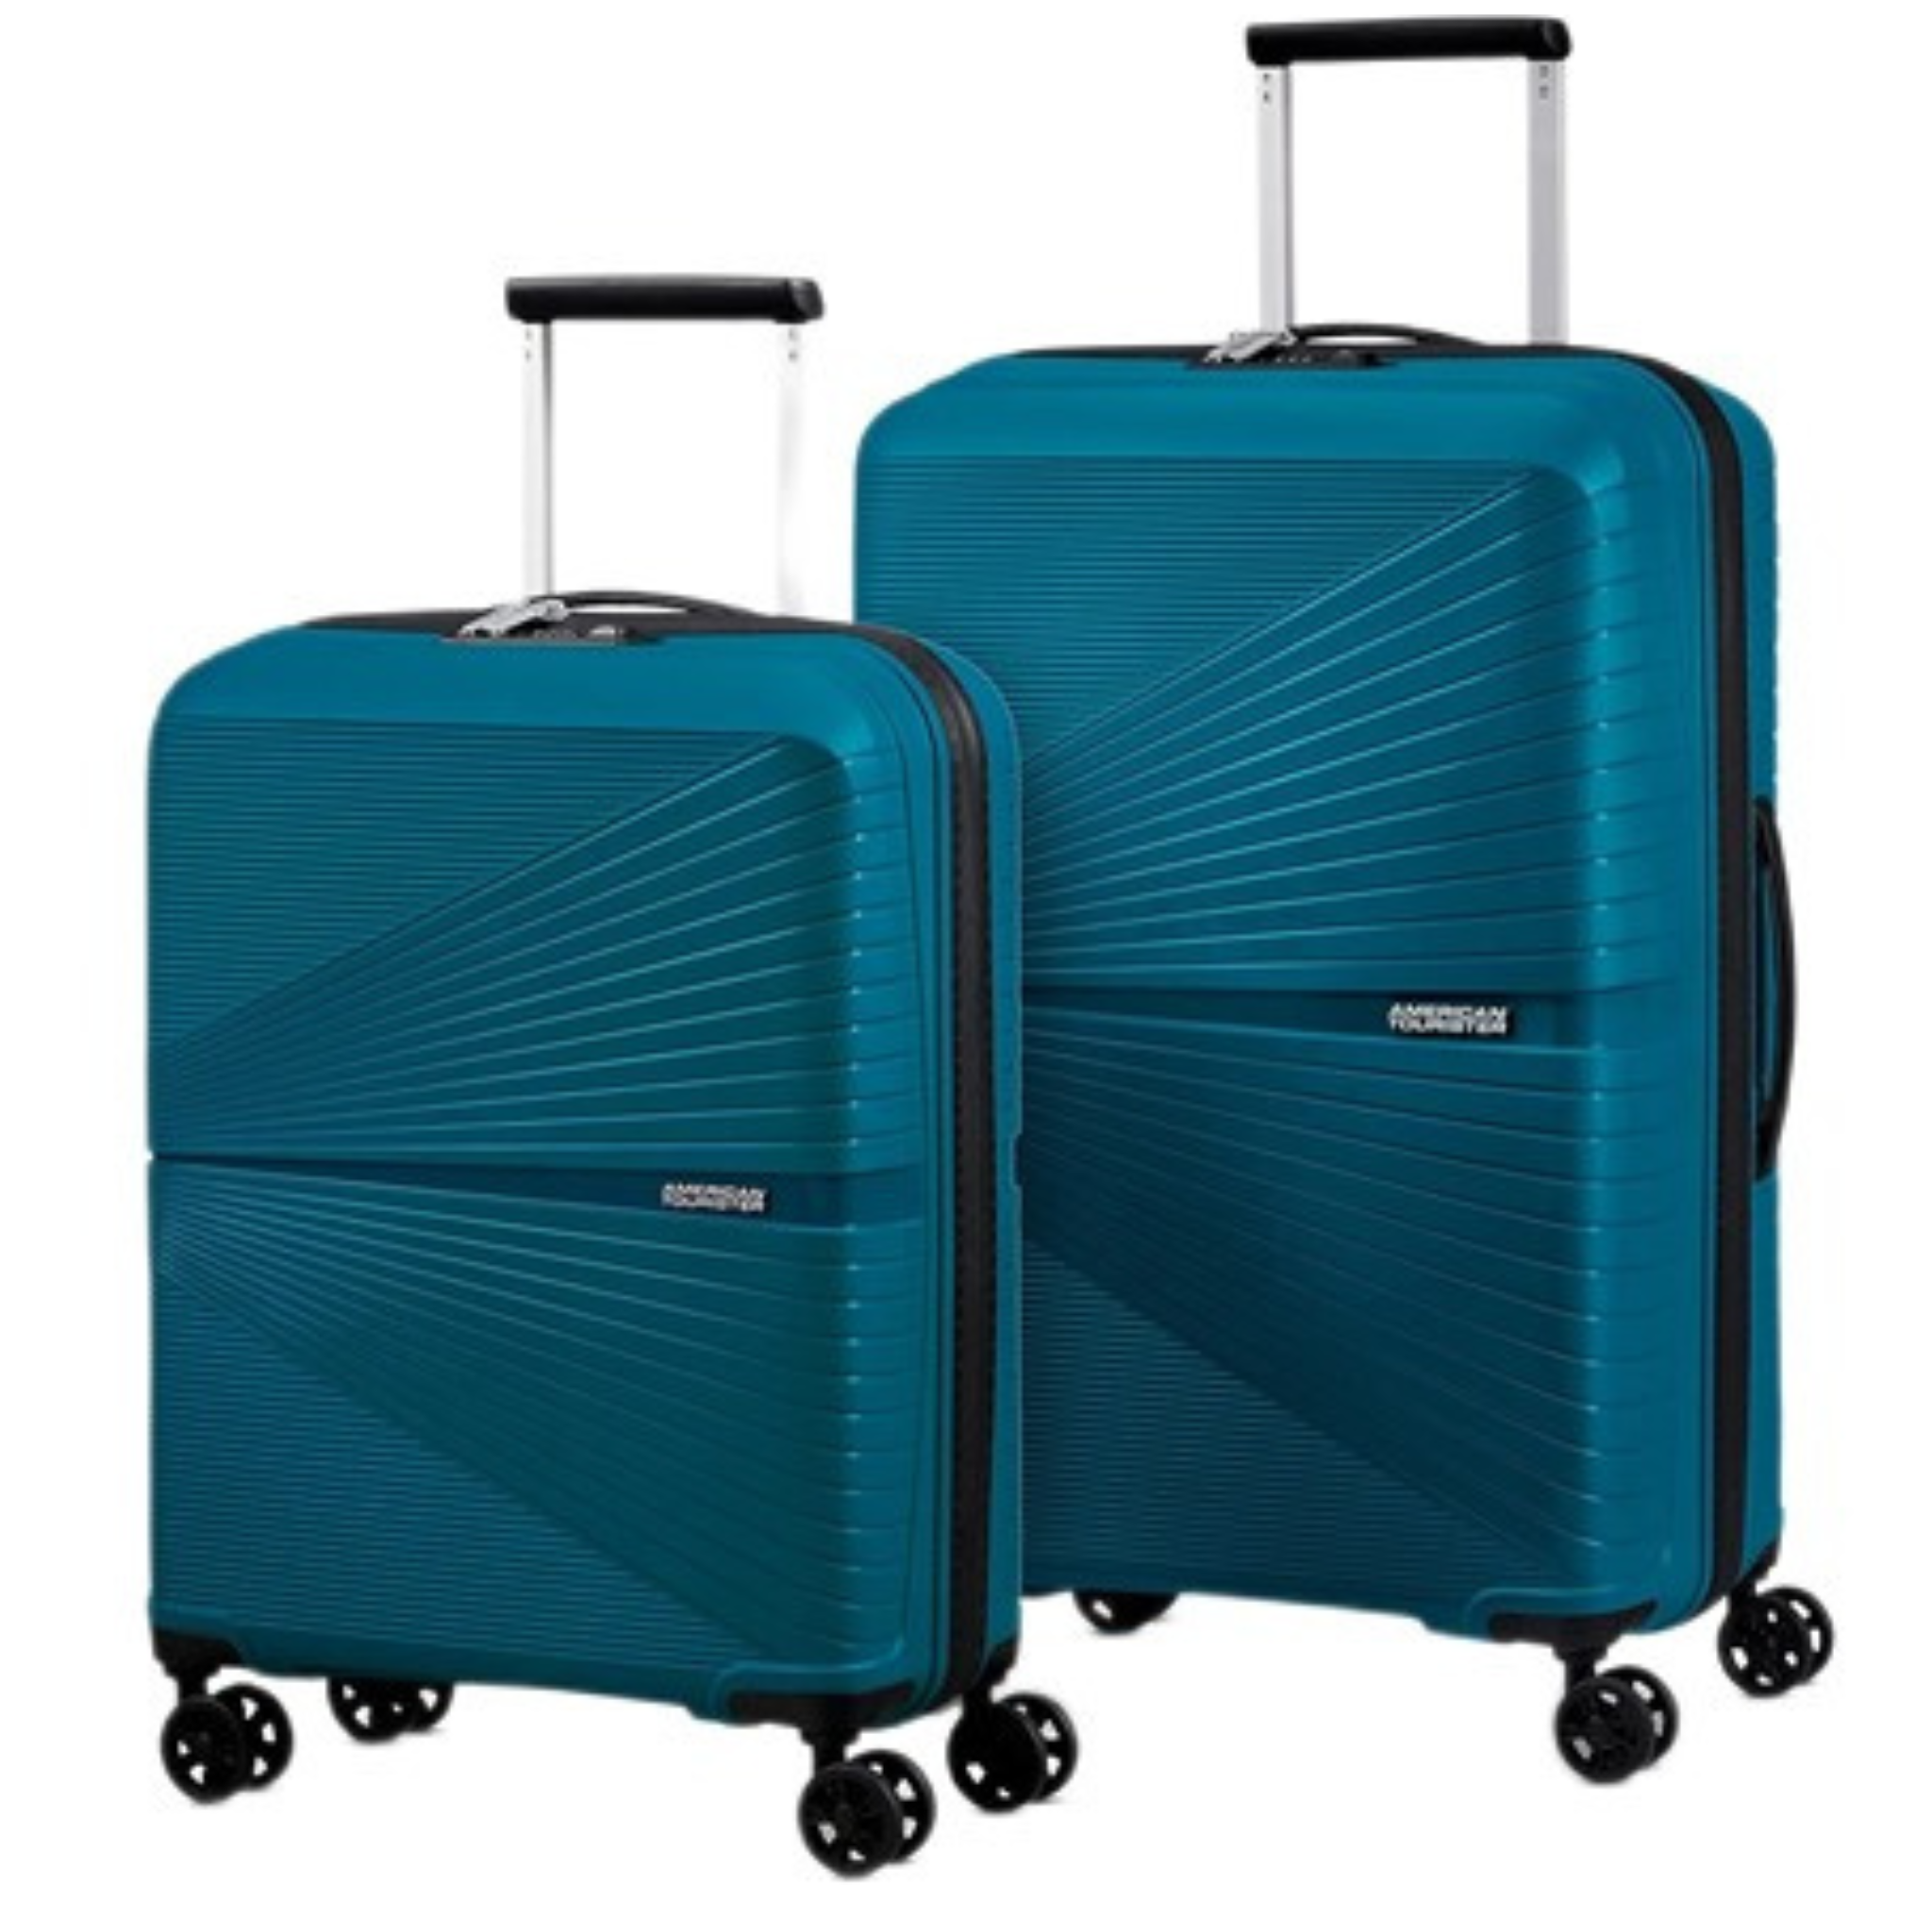 American Tourister Airconic Hardside Expandable Spinner Luggage Set